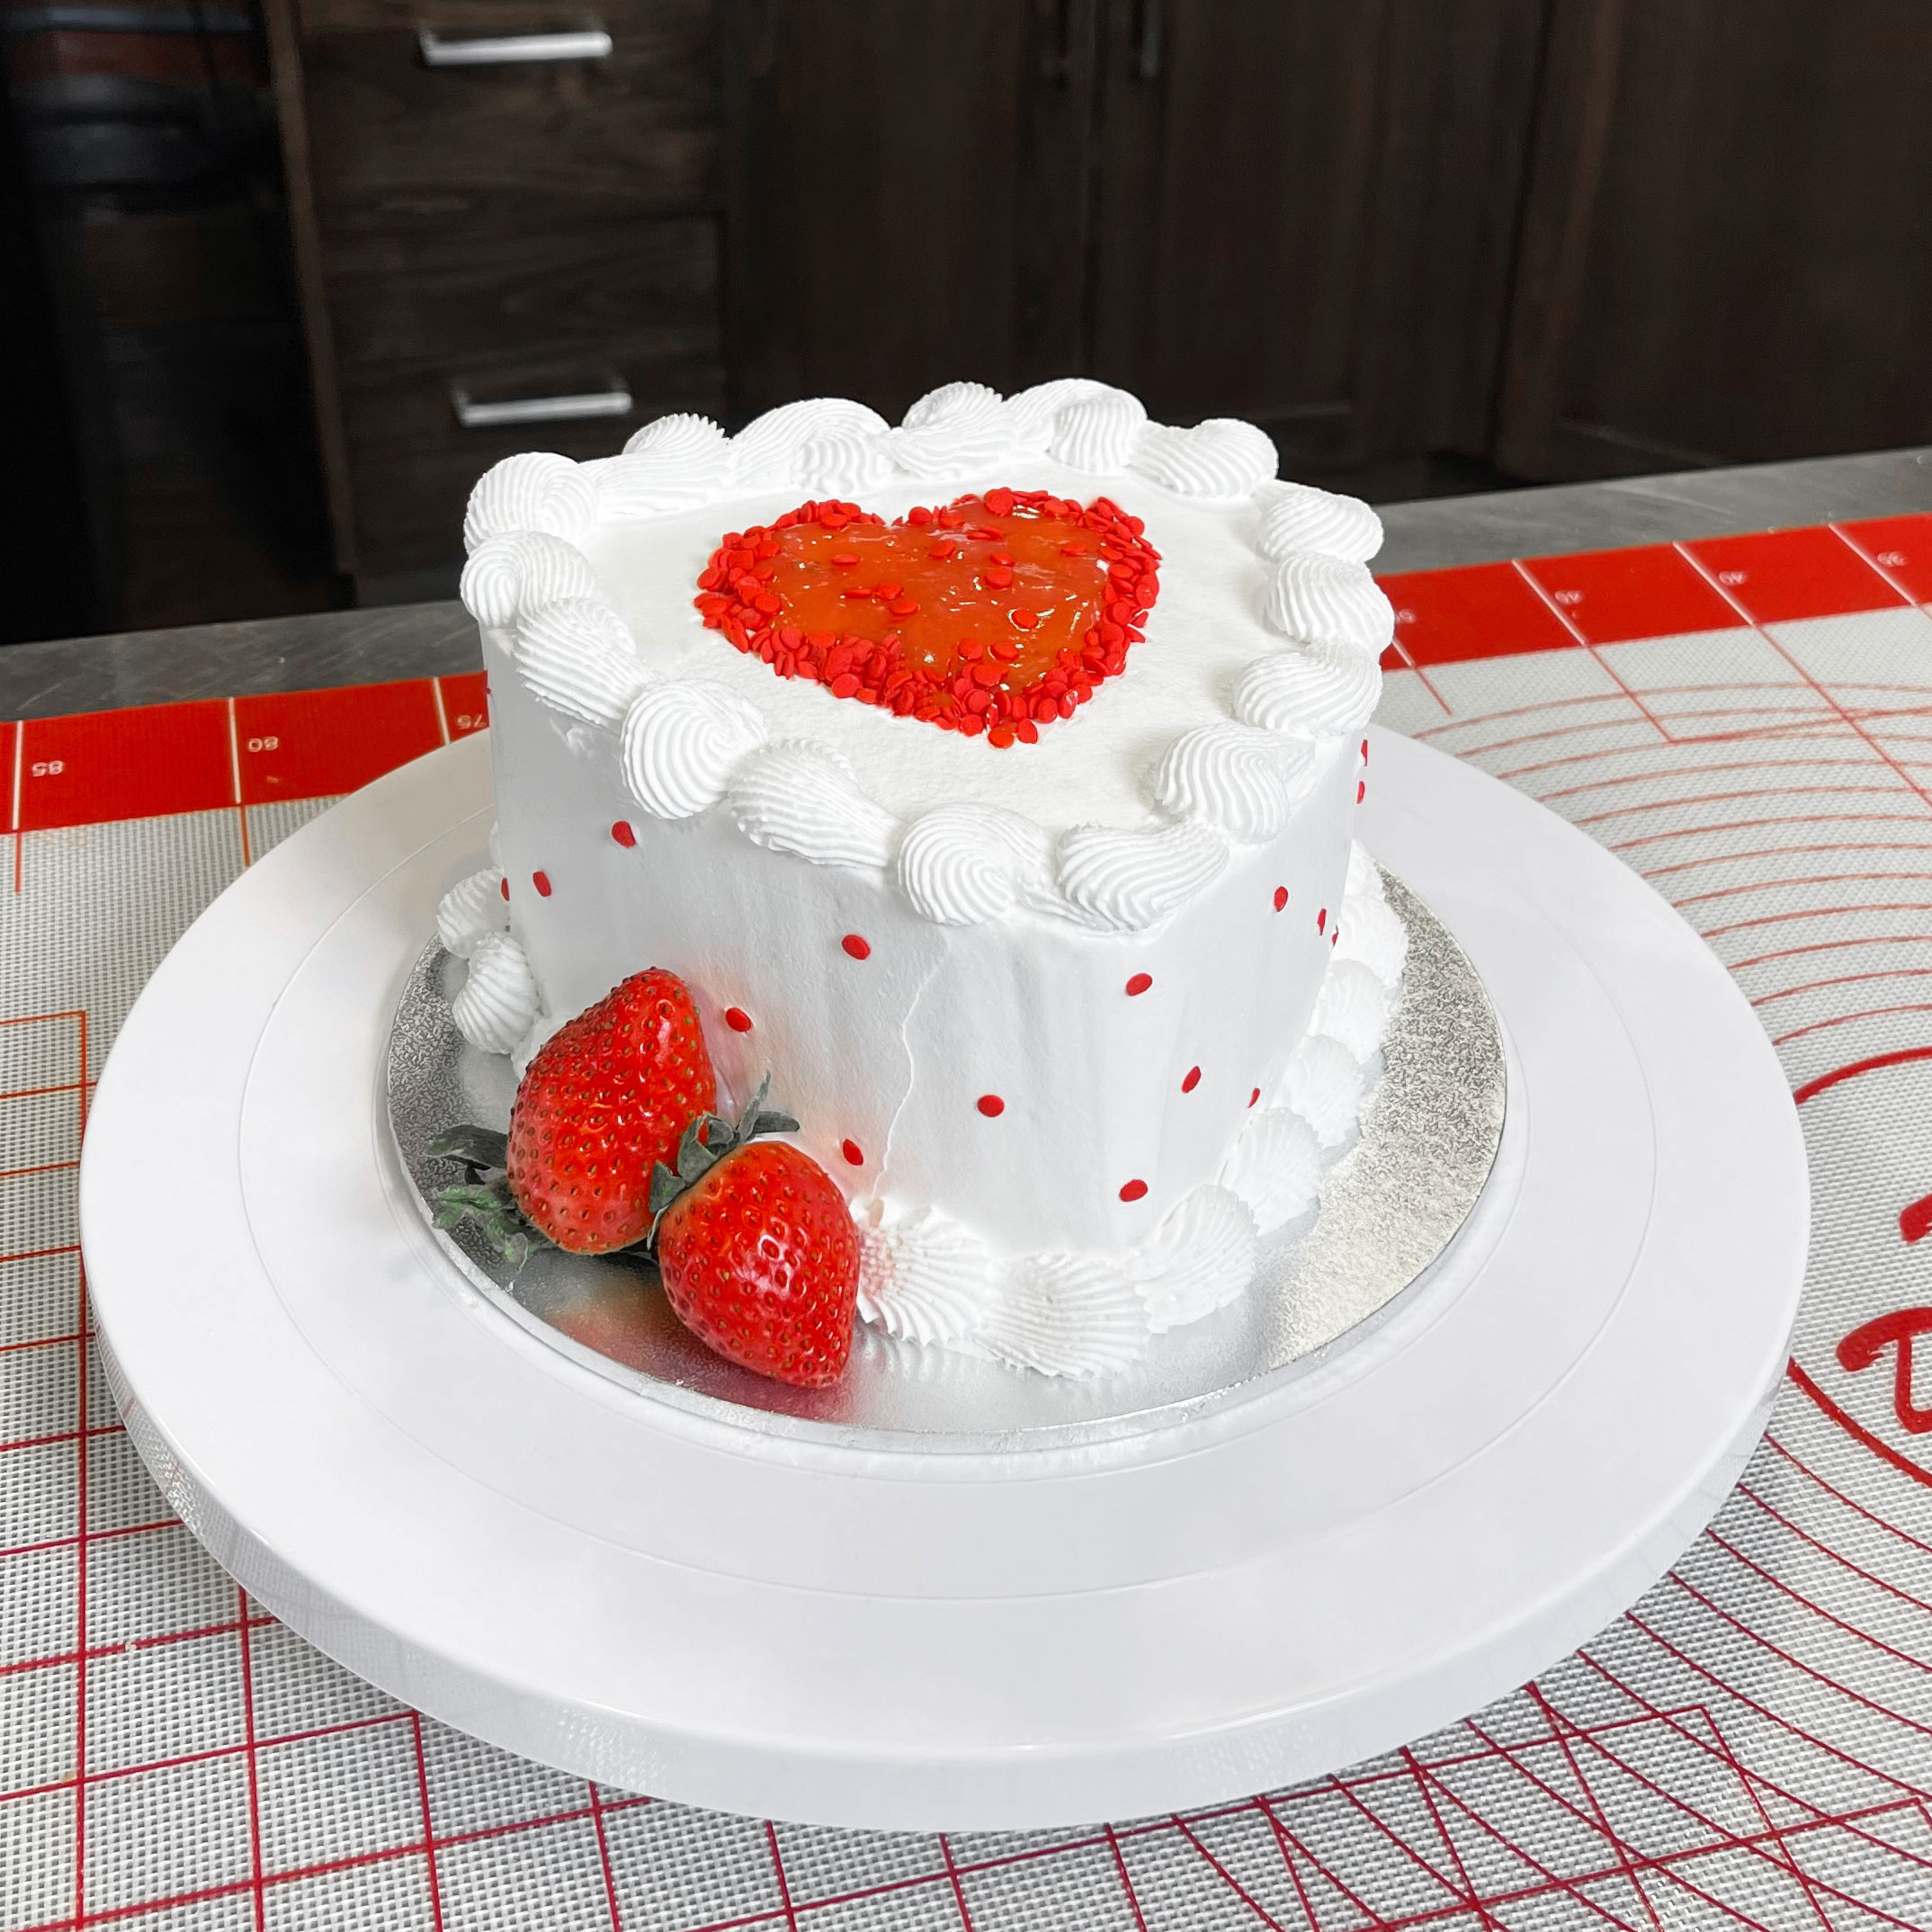 Cake Pan Heart 6 x 3 Inches Deep by Fat Daddio's Shaped